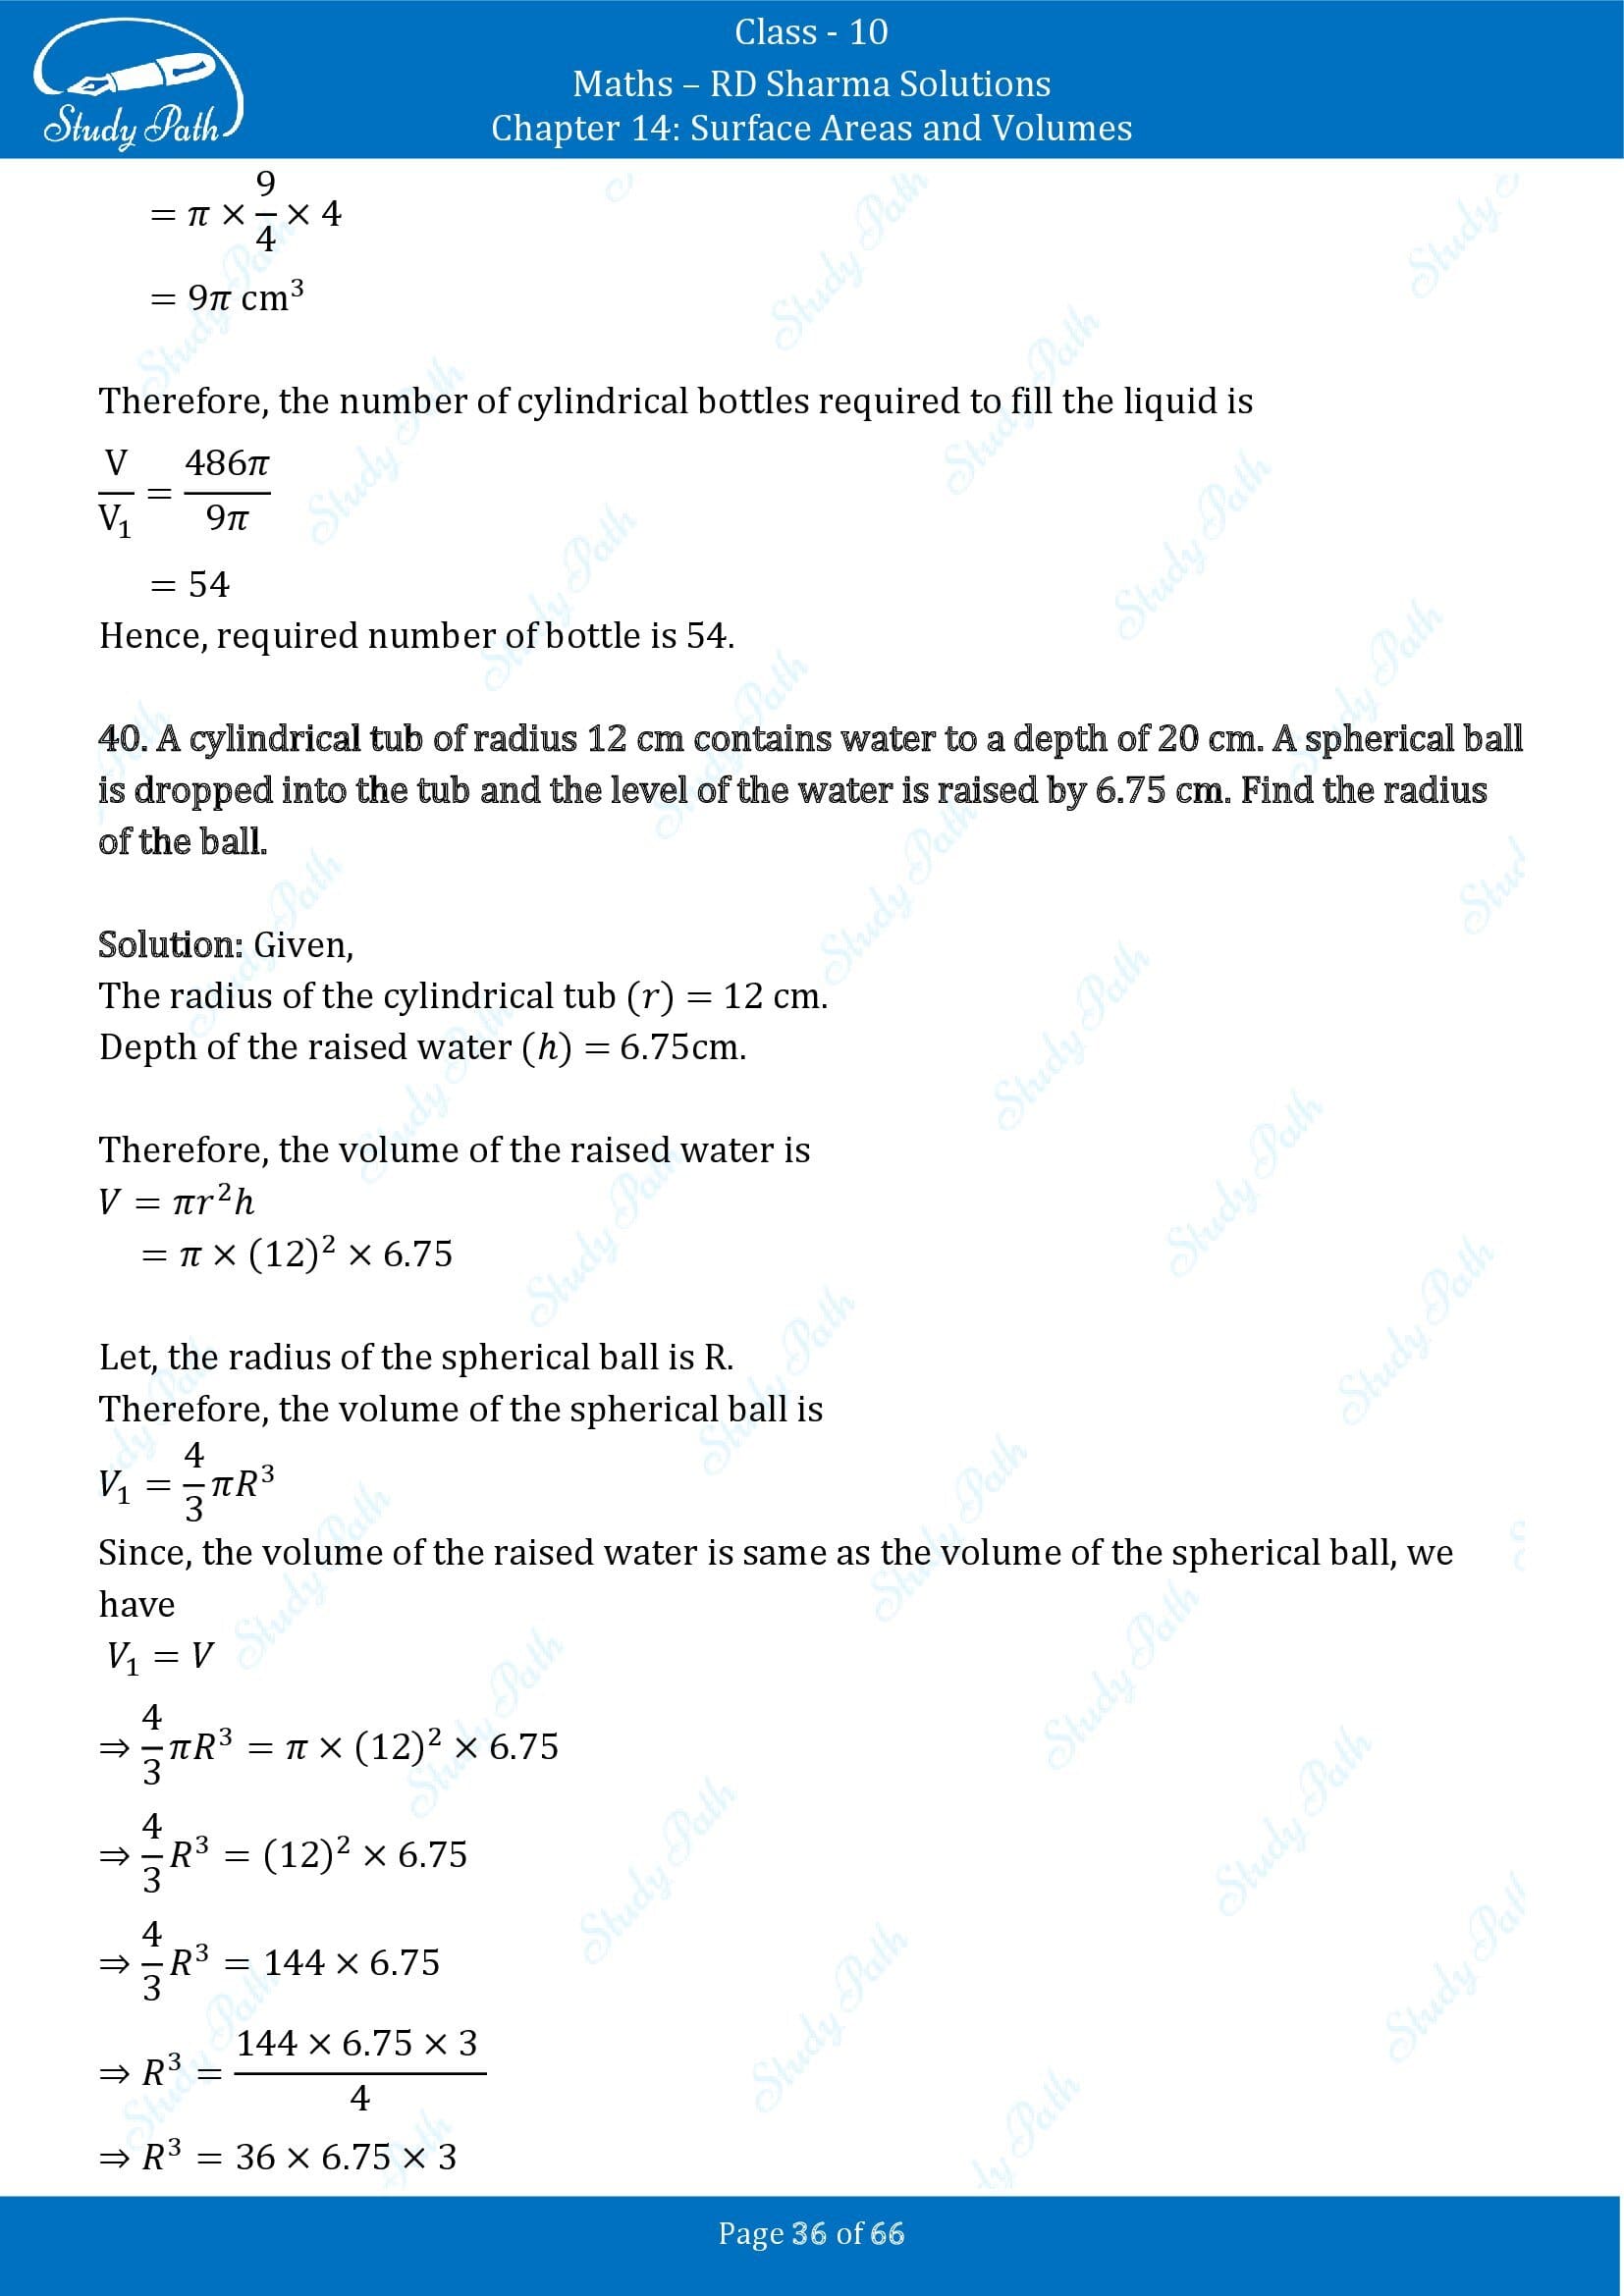 RD Sharma Solutions Class 10 Chapter 14 Surface Areas and Volumes Exercise 14.1 00036